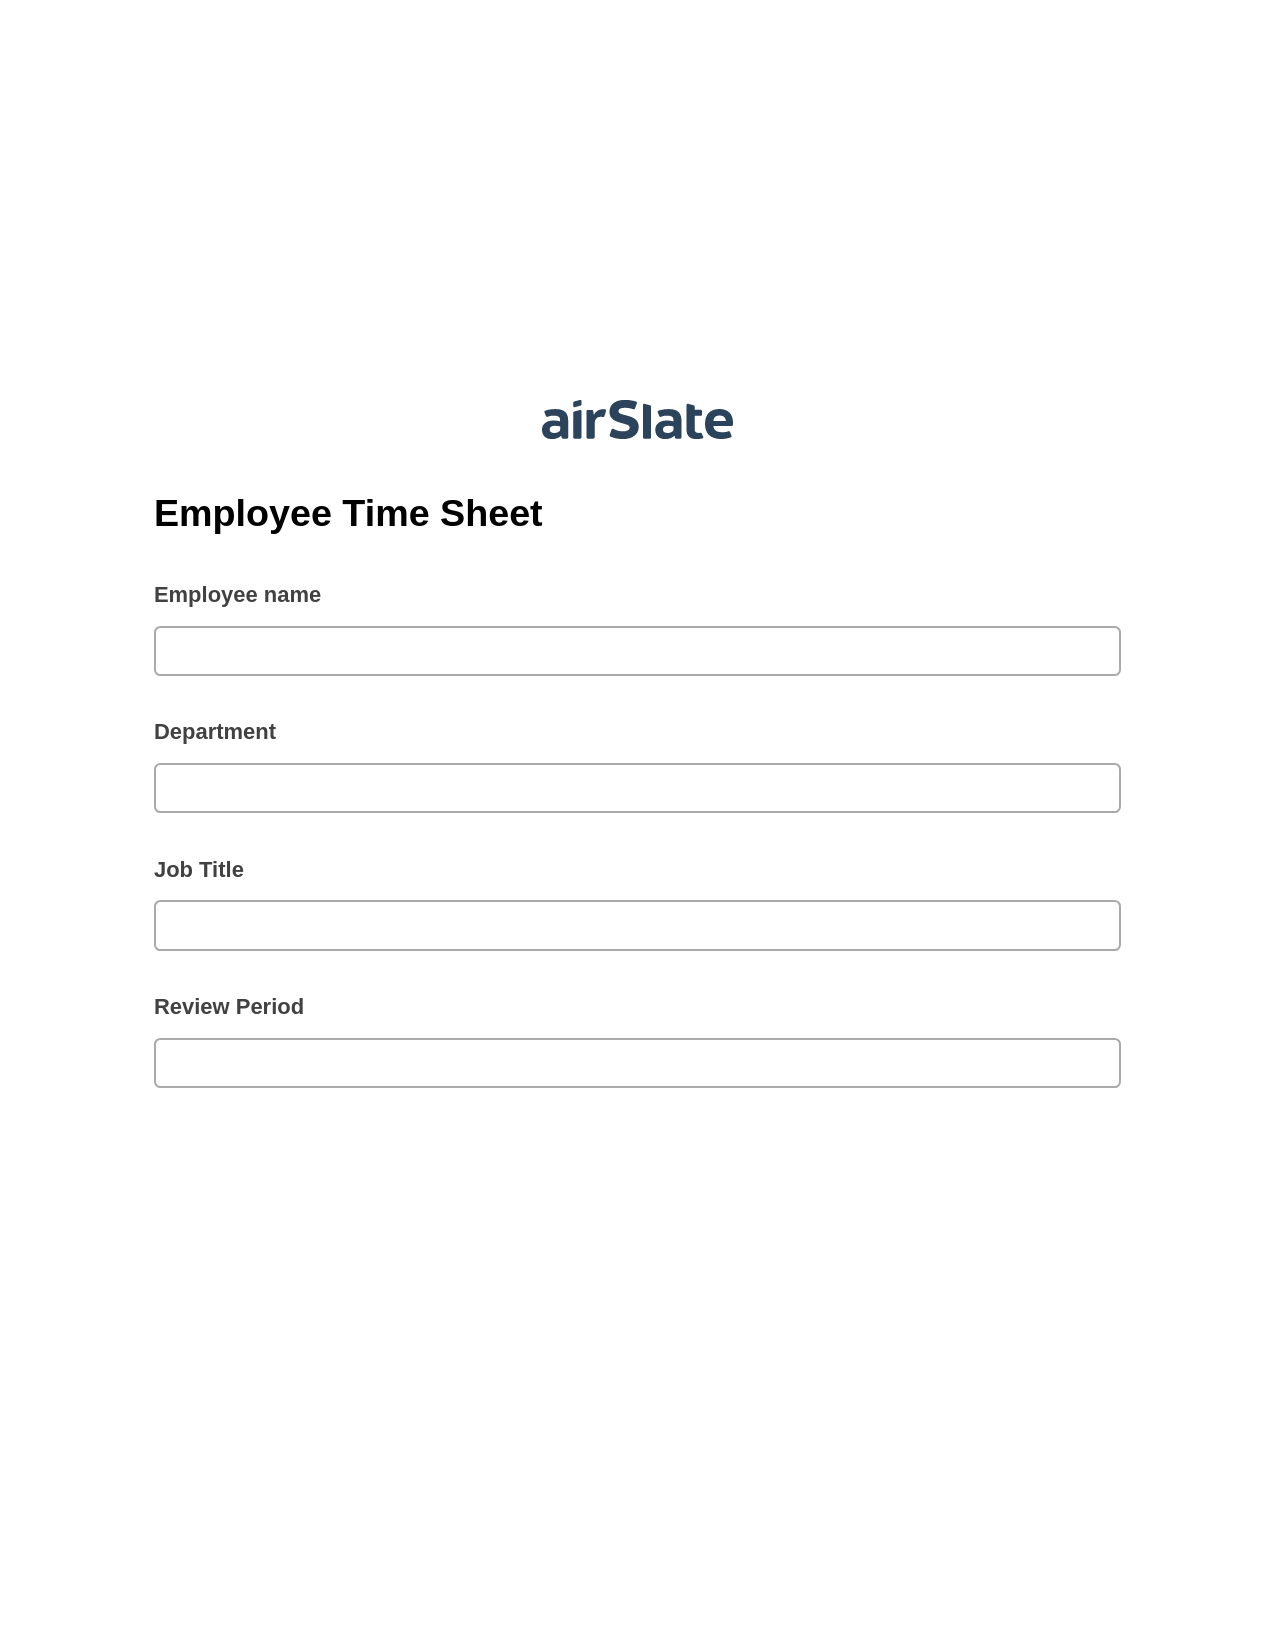 Multirole Employee Time Sheet Pre-fill from Excel Spreadsheet Bot, Create Salesforce Records Bot, Archive to Google Drive Bot